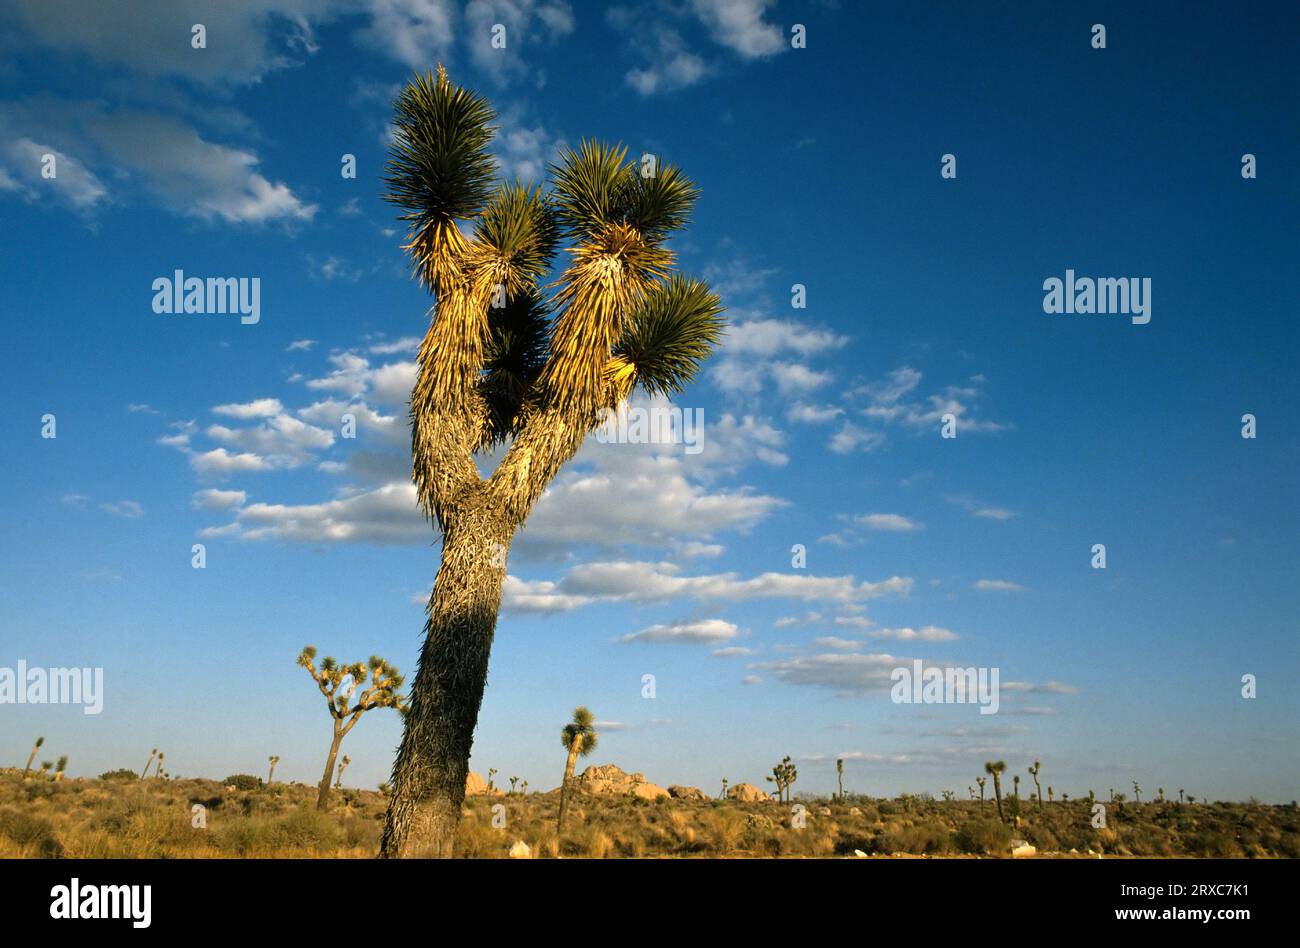 Joshua Tree National Park with cactus trees in California, USA, during the daytimetime Stock Photo